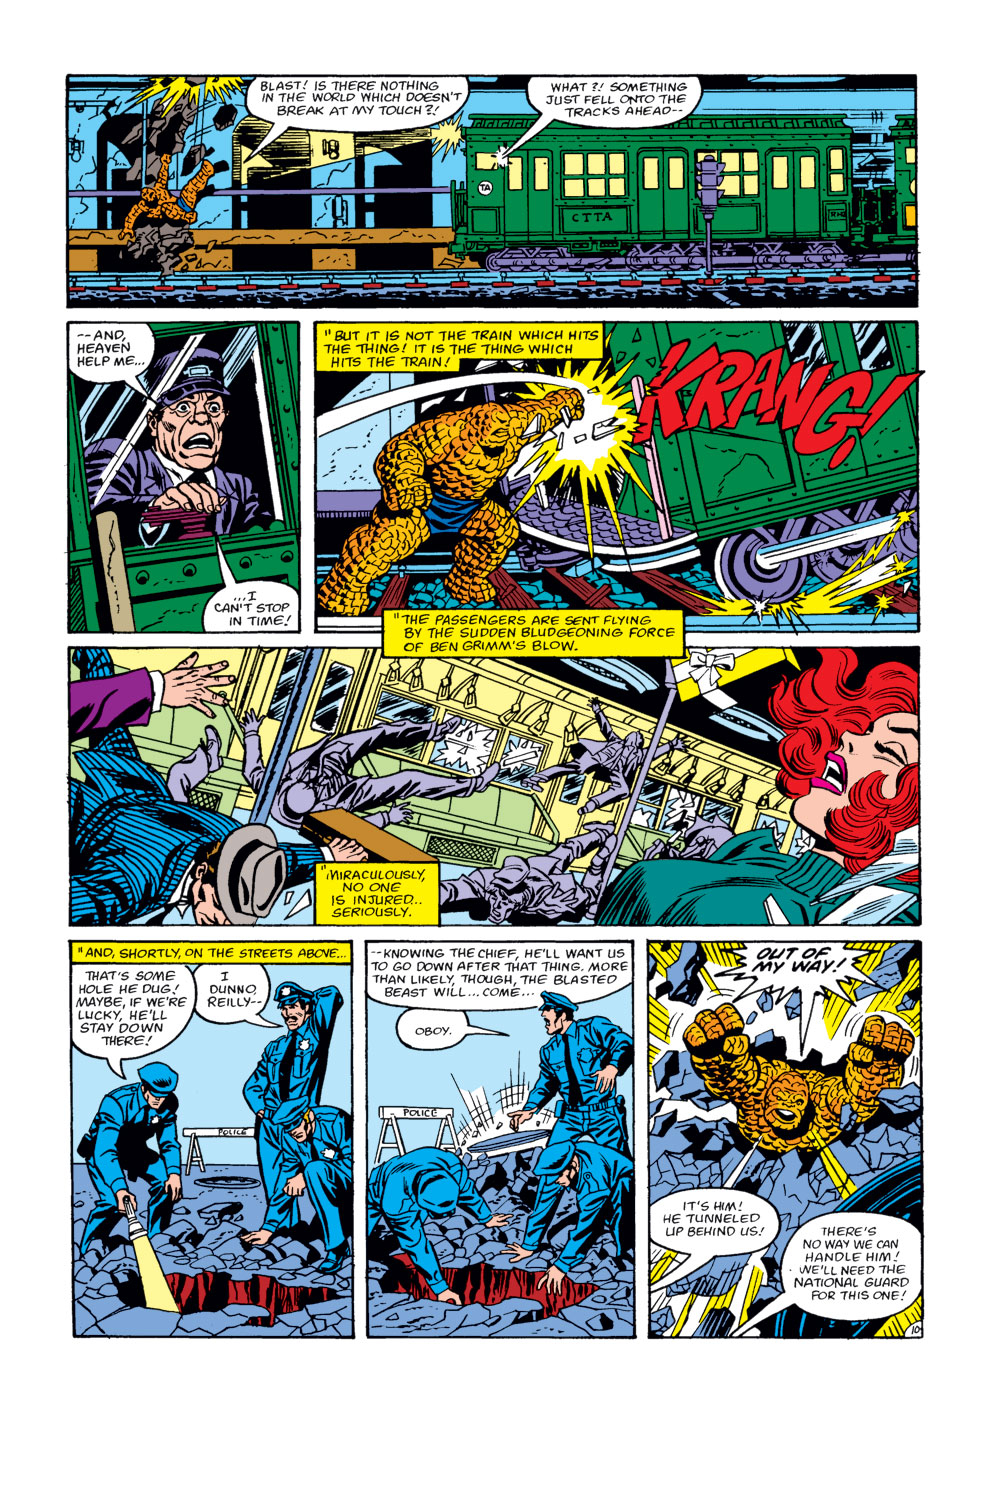 What If? (1977) issue 31 - Wolverine had killed the Hulk - Page 31